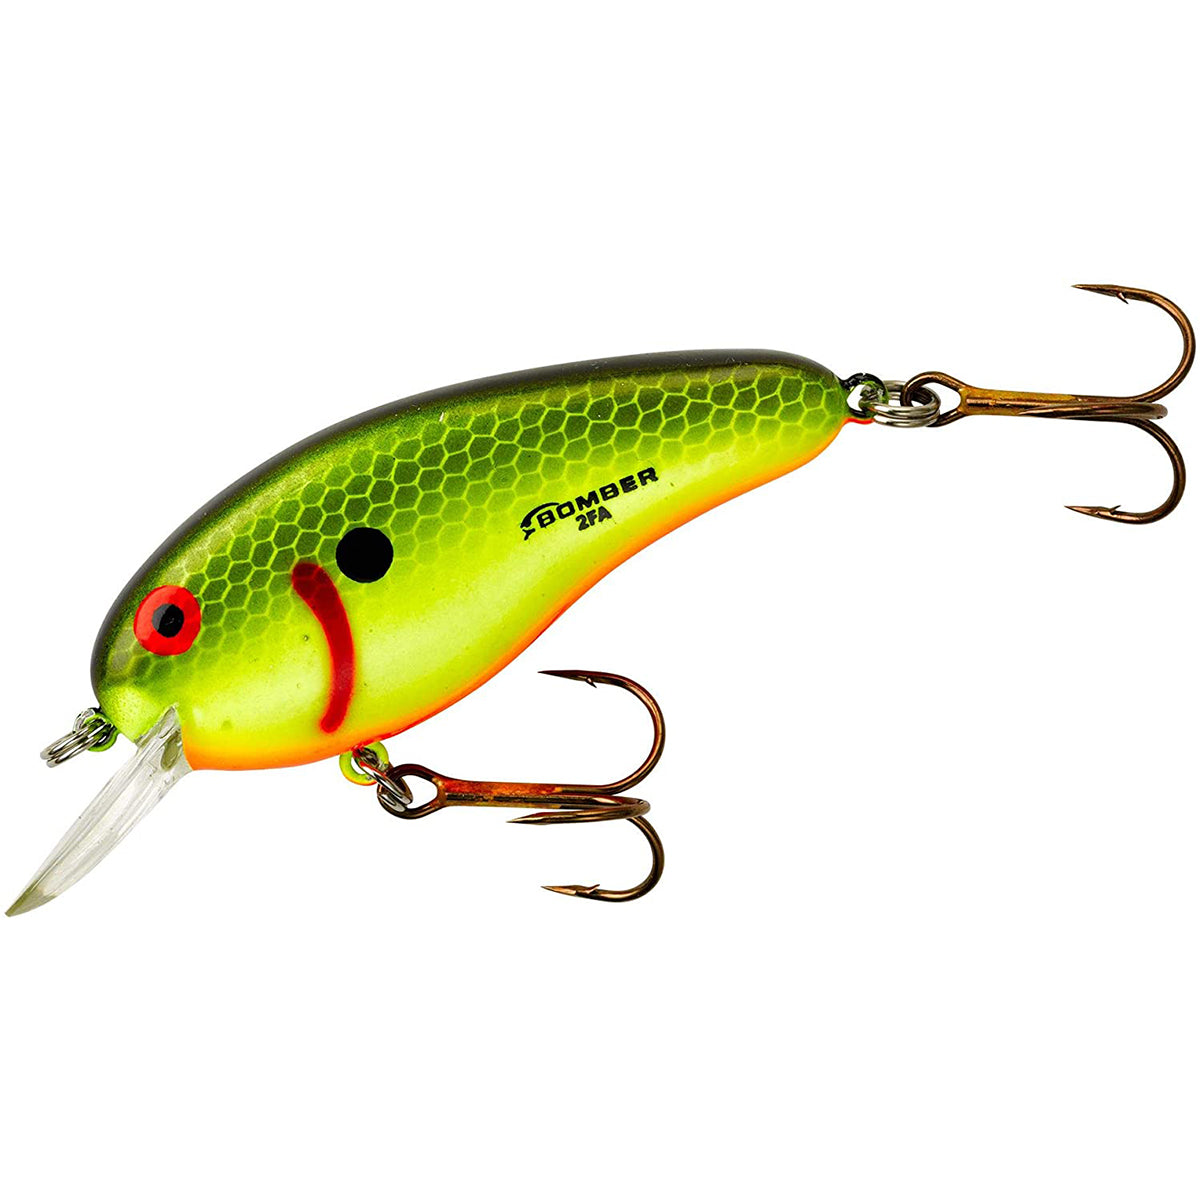 Bomber Deep Flat A 3/8 oz Fishing Lure Bomber Lures